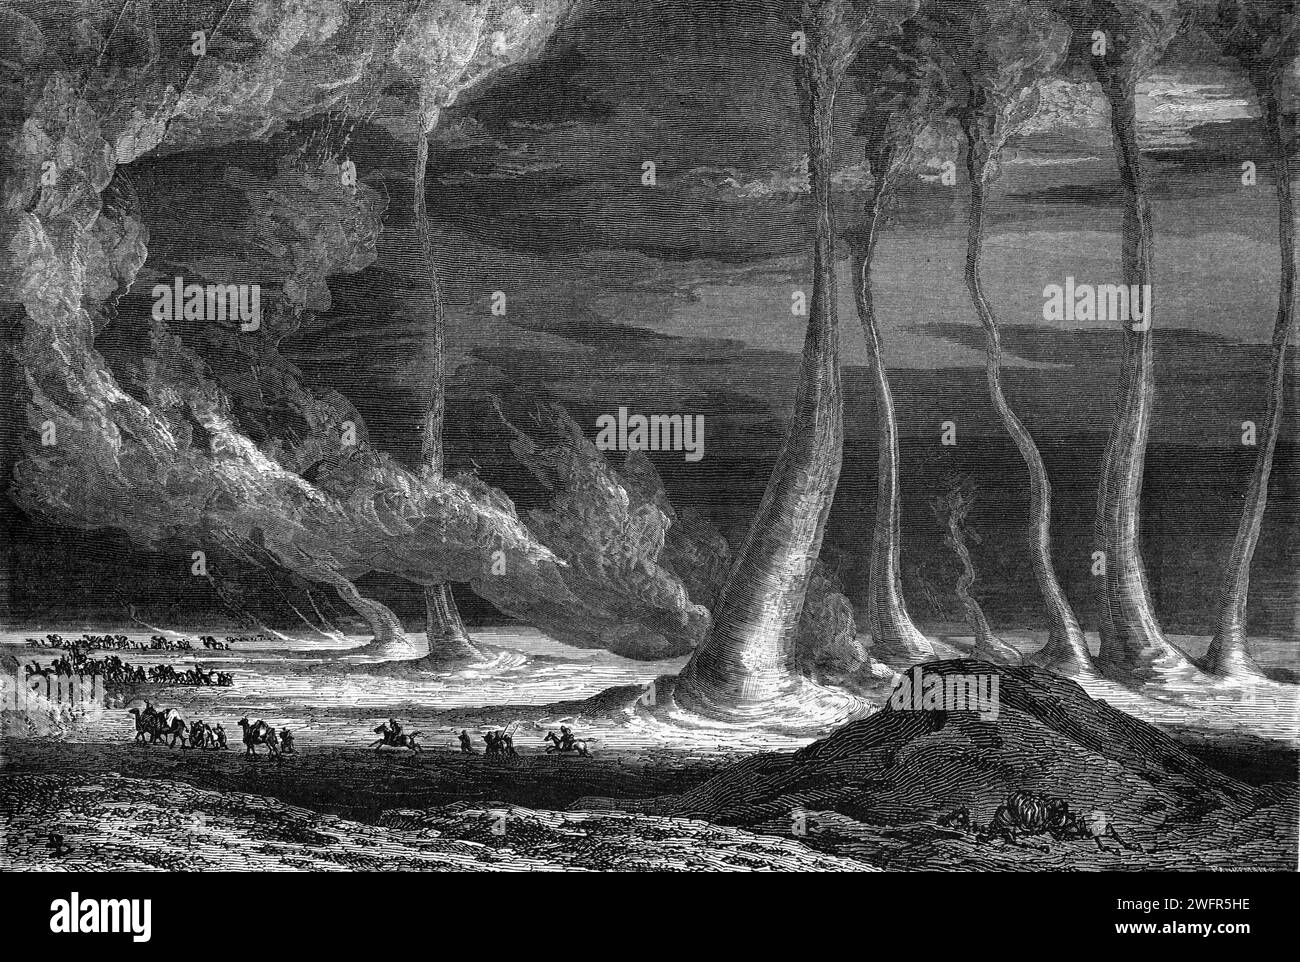 Whirlwinds, Tornados, Twisters and Dust Storm, Sandstorm or Sandstorms on the Steppe, Steppeland or Deserts of Central Asia. Vintage or Historic Engraving or Illustration 1863 Stock Photo